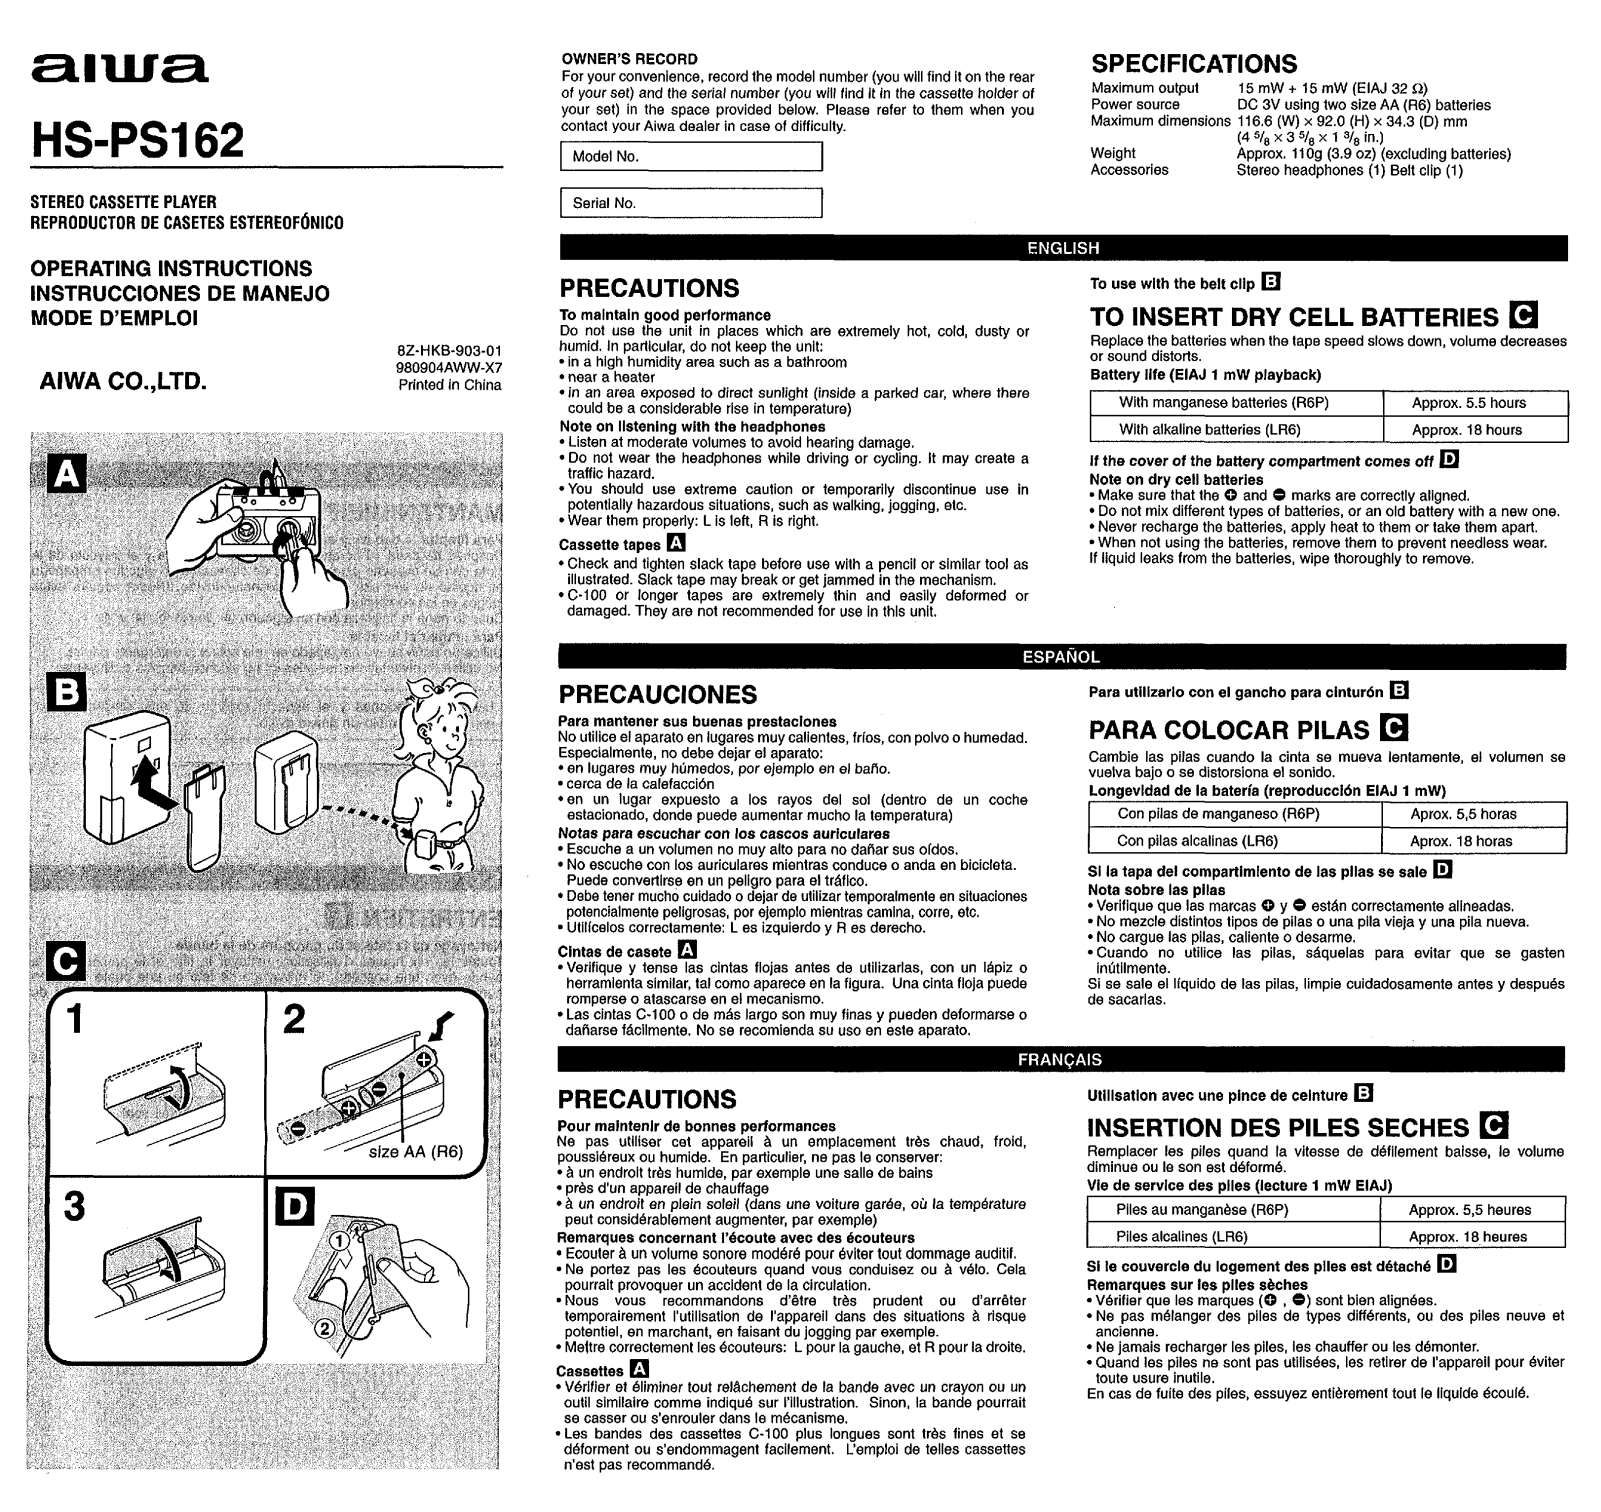 Sony HSPS162 OPERATING MANUAL